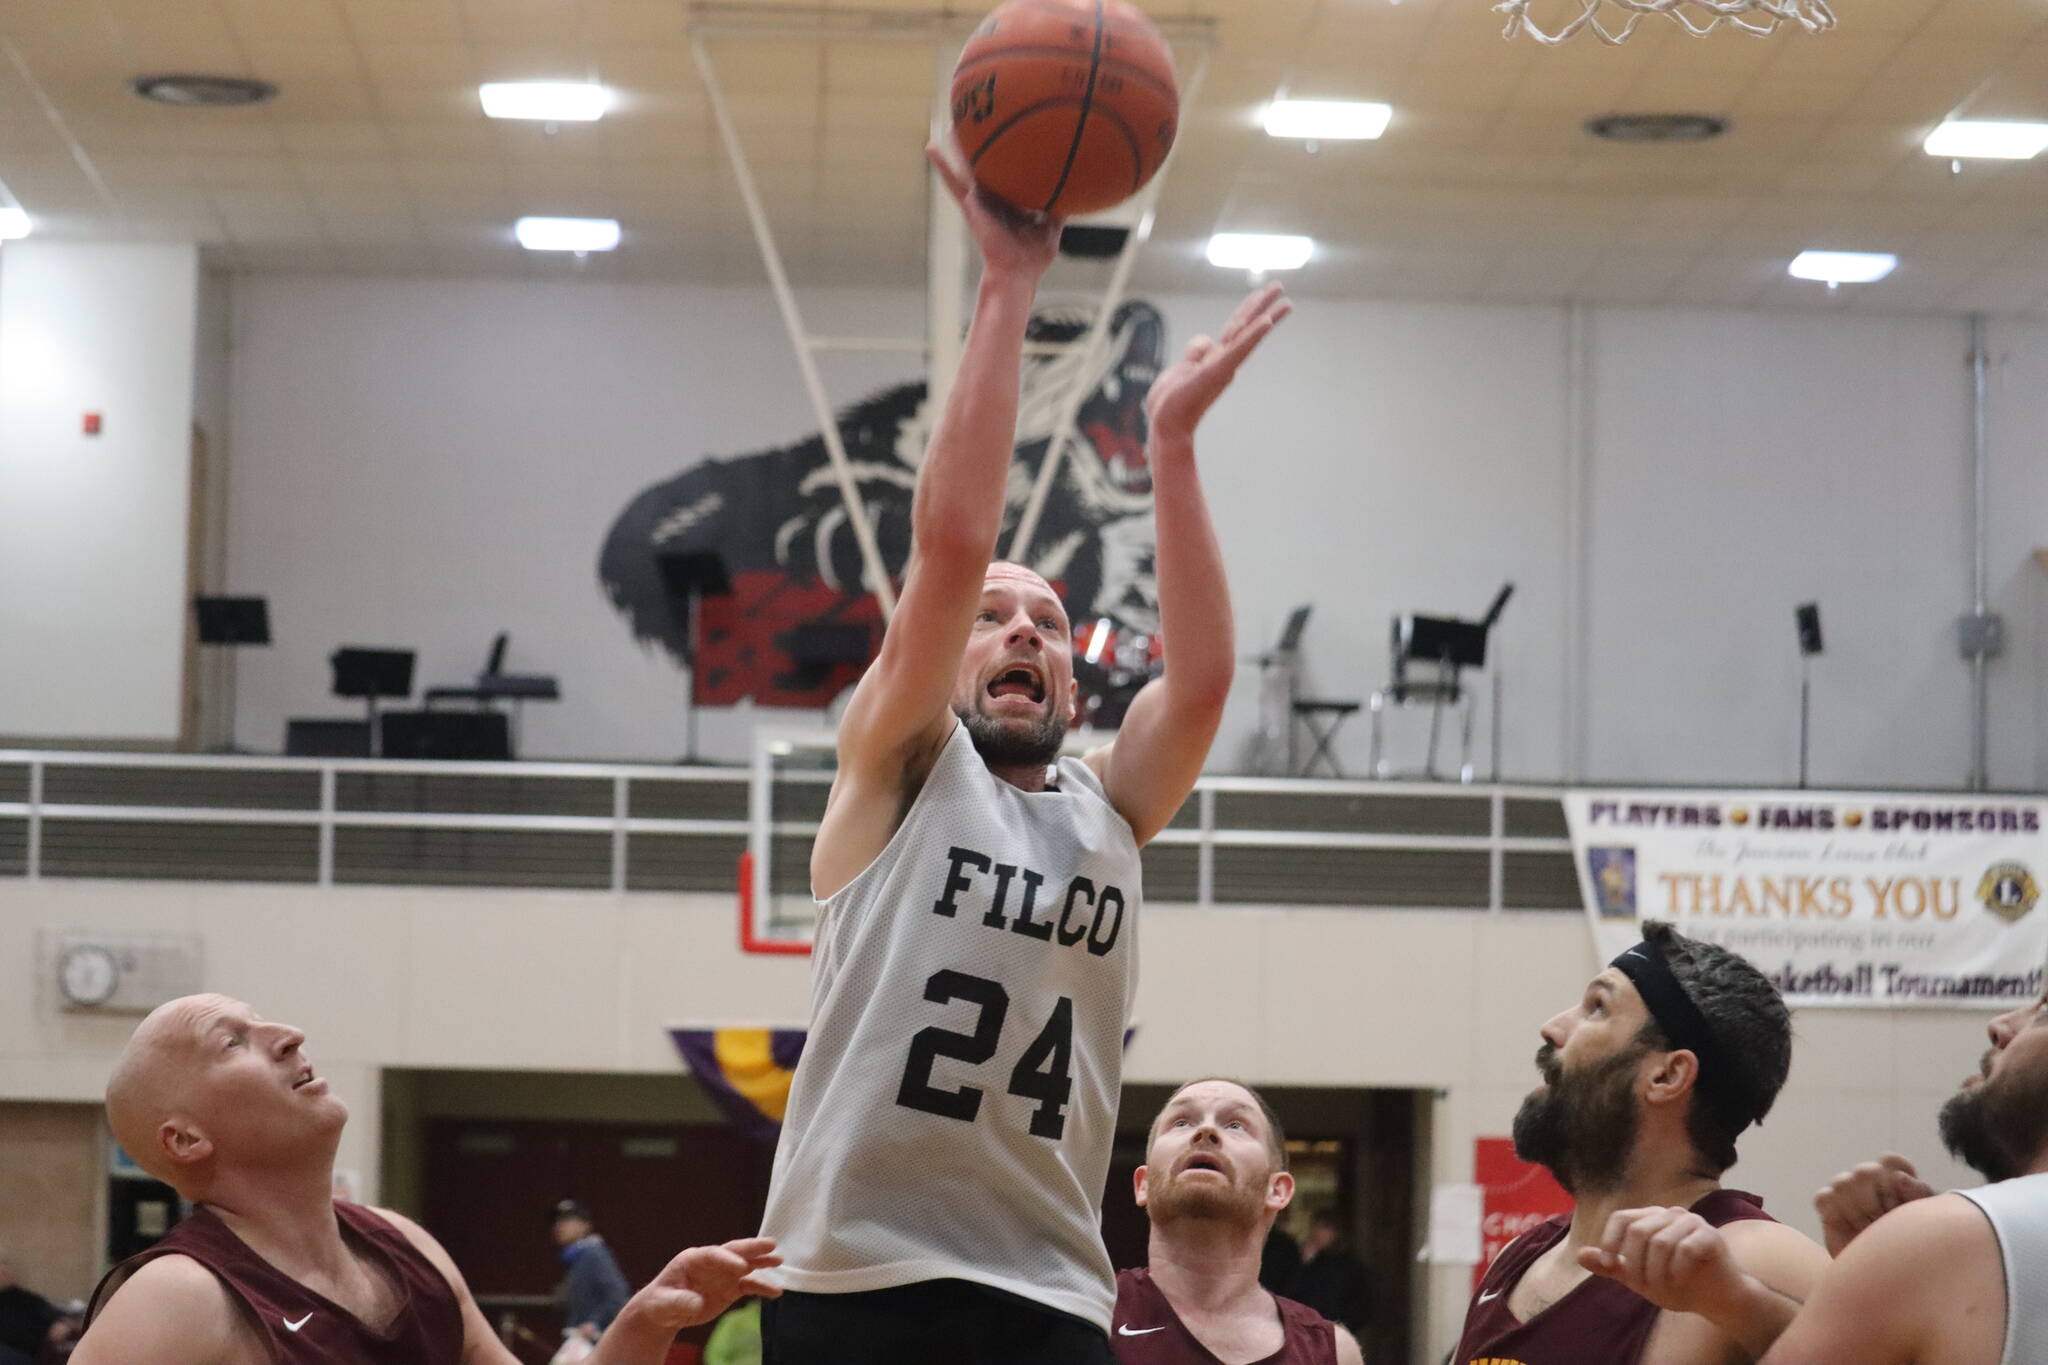 Filcom’s Alex Heumann (24) puts up a jump shot against Klukwan on Thursday for the second C bracket game of the day in this year’s Gold Medal basketball tournament. Heumann finished the game with 27 points, and his team netted a C Bracket win. (Jonson Kuhn / Juneau Empire)